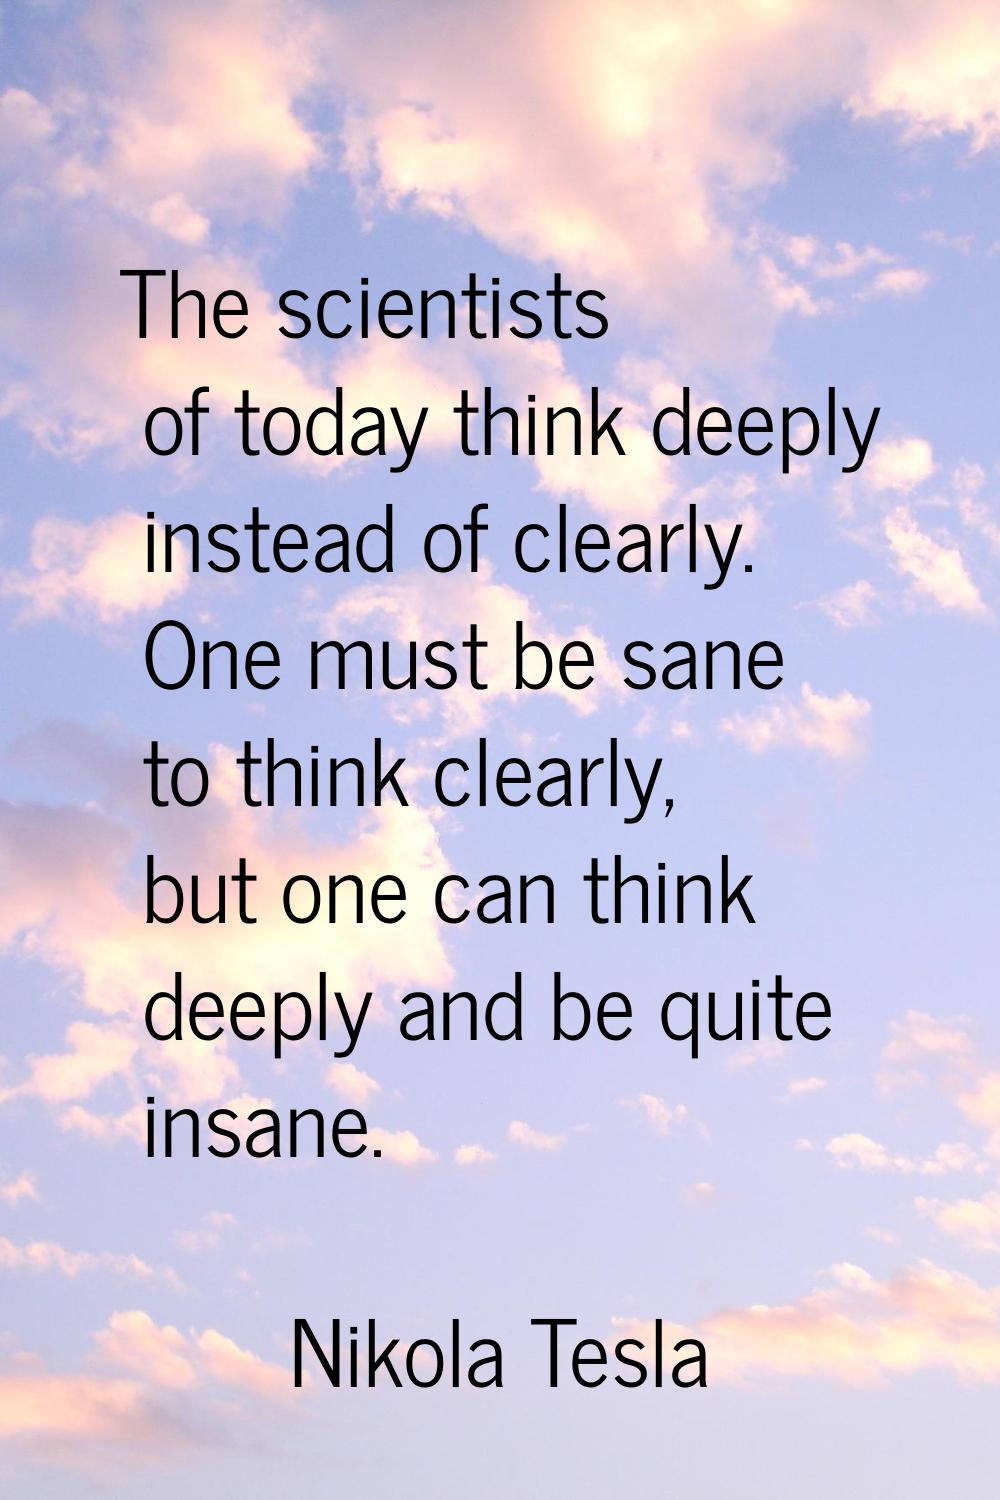 The scientists of today think deeply instead of clearly. One must be sane to think clearly, but one